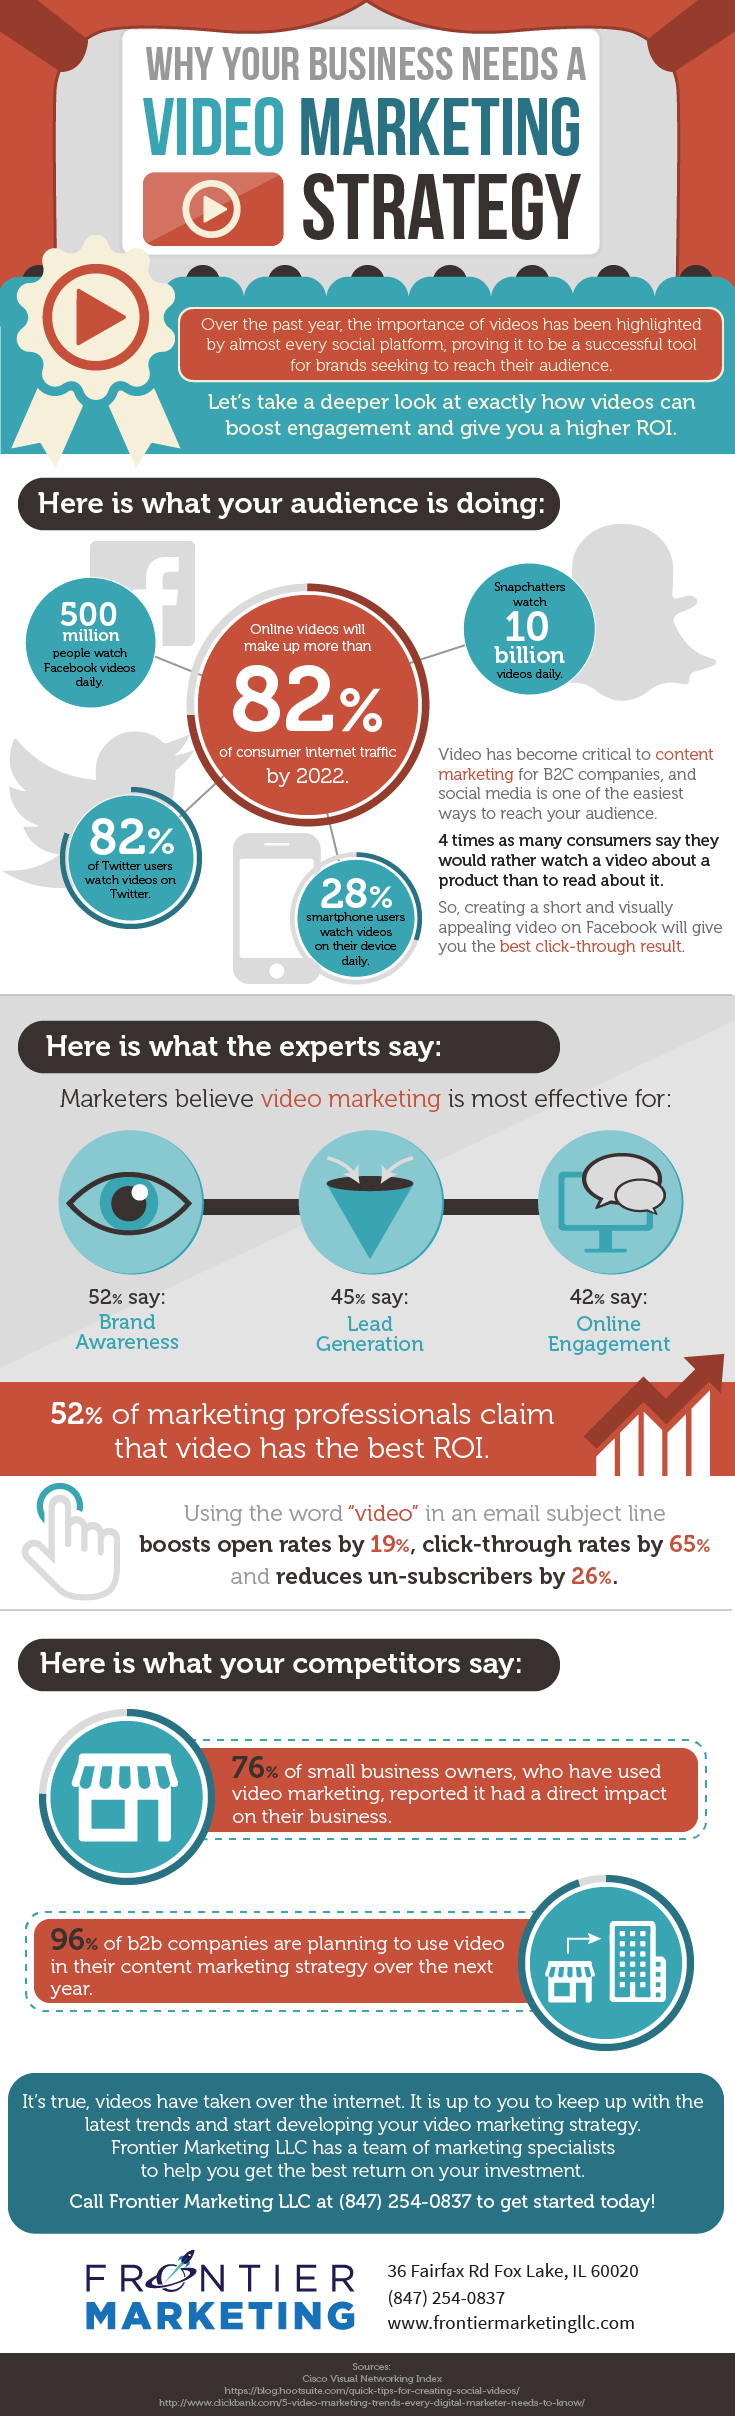 An infographic showing different statistics for video watching and businesses that use videos.